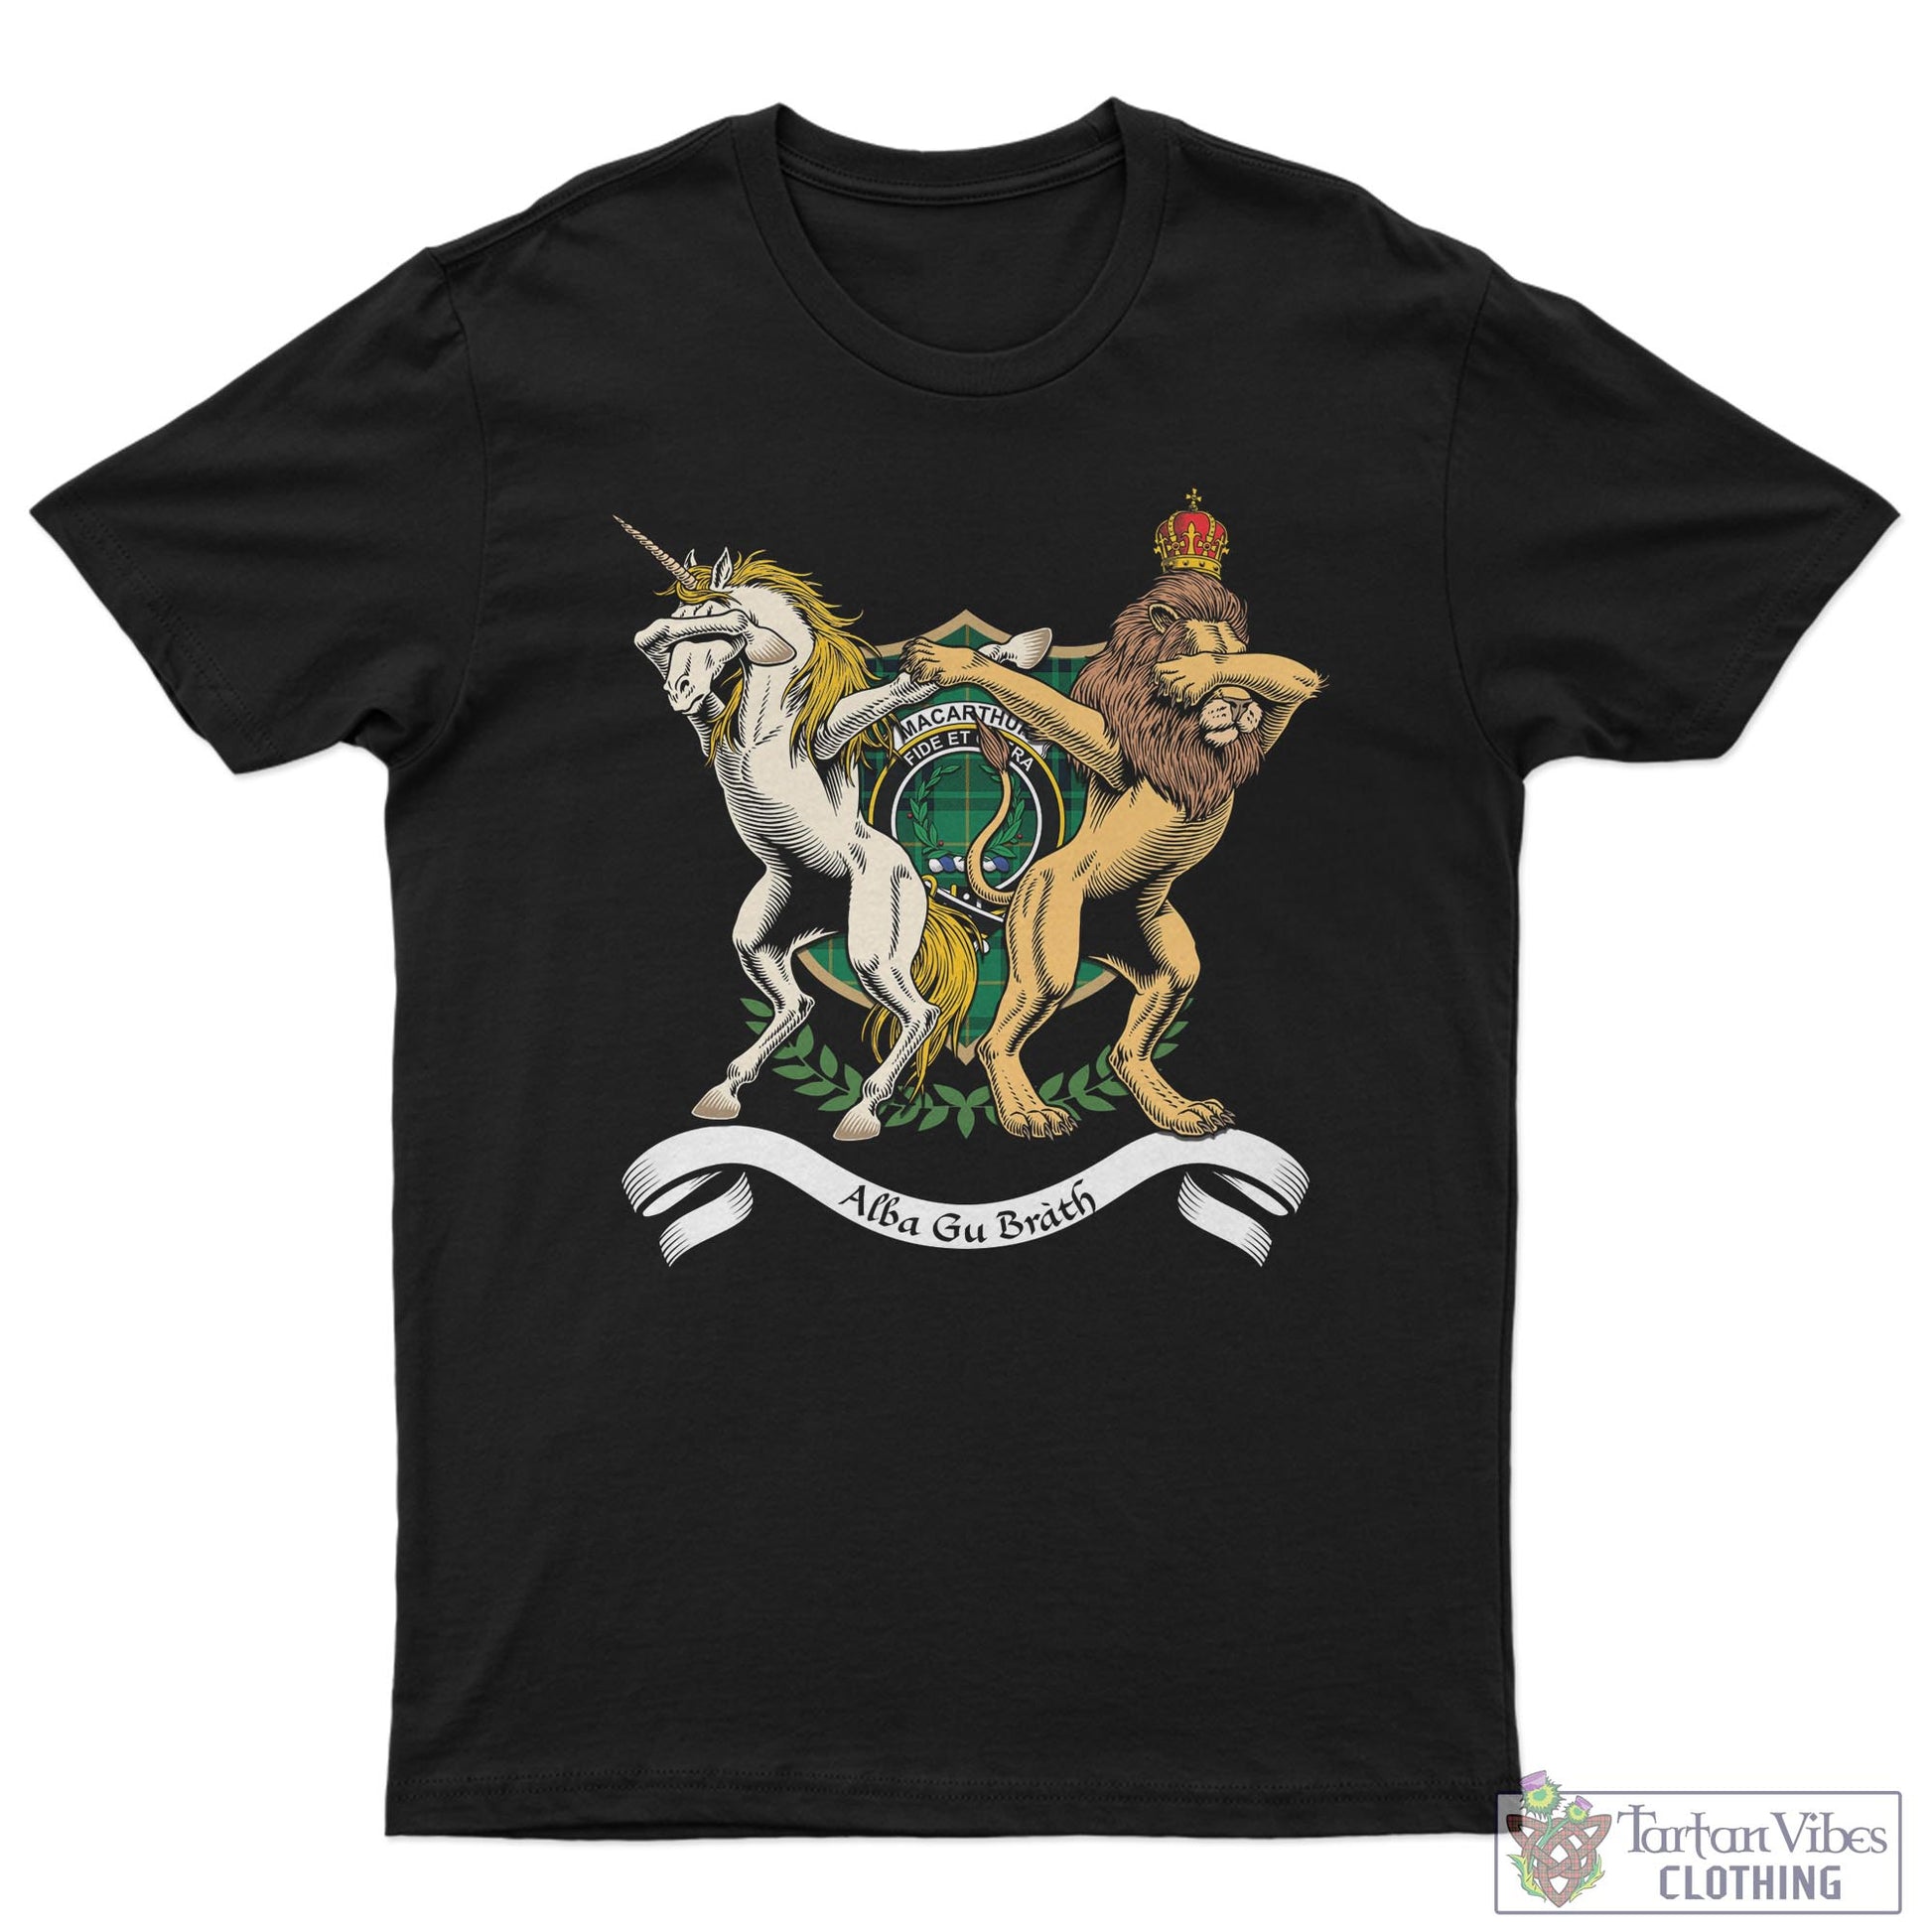 Tartan Vibes Clothing MacArthur Ancient Family Crest Cotton Men's T-Shirt with Scotland Royal Coat Of Arm Funny Style